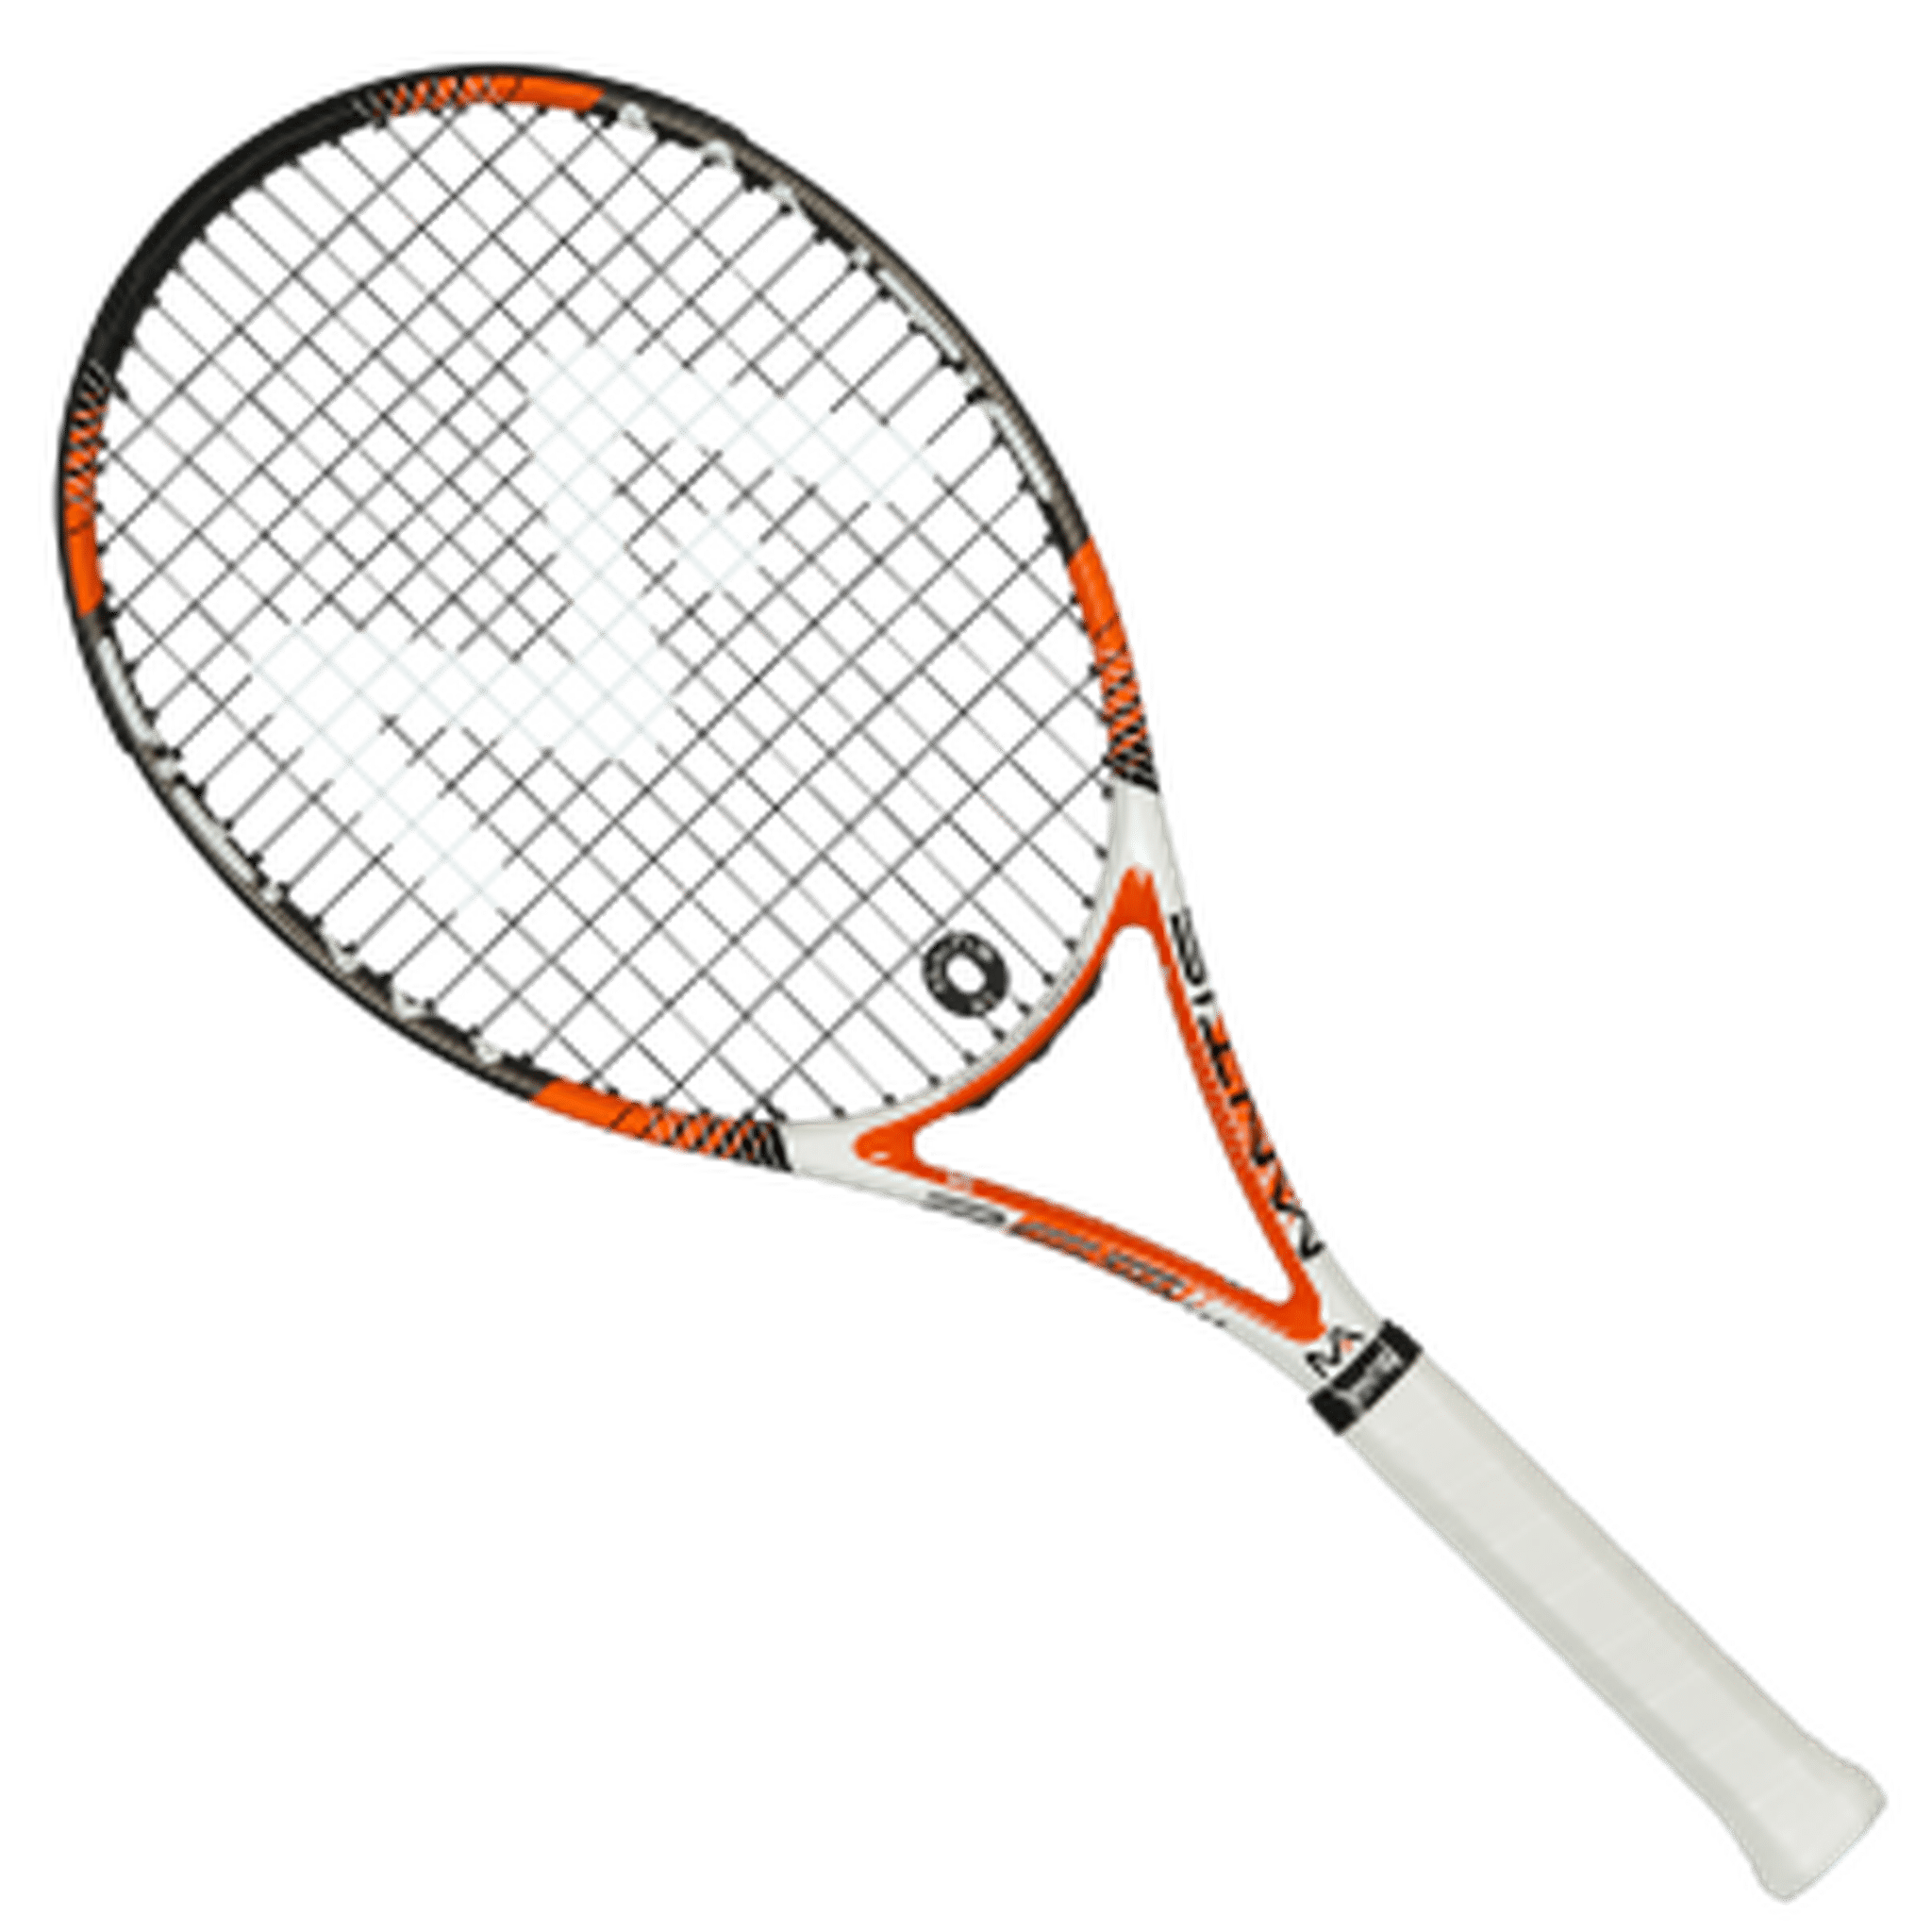 The MANTIS 265 Competition Series